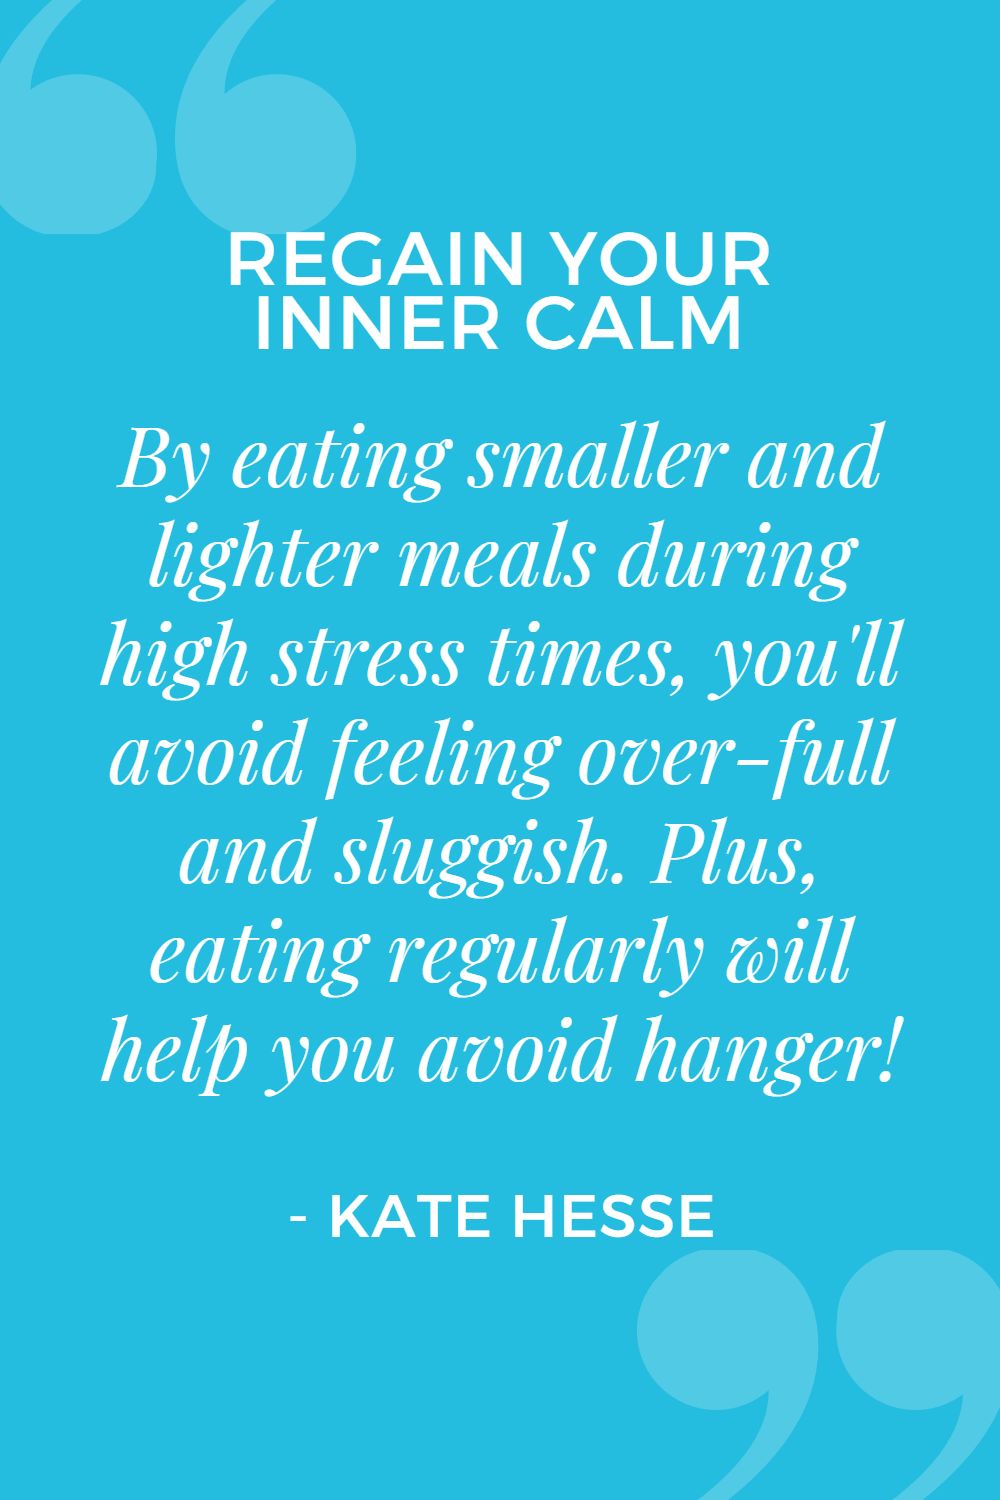 By eating smaller and lighter meals during high stress times, you'll avoid feeling over-full and sluggish. Plus, eating regularly will help you avoid hanger!